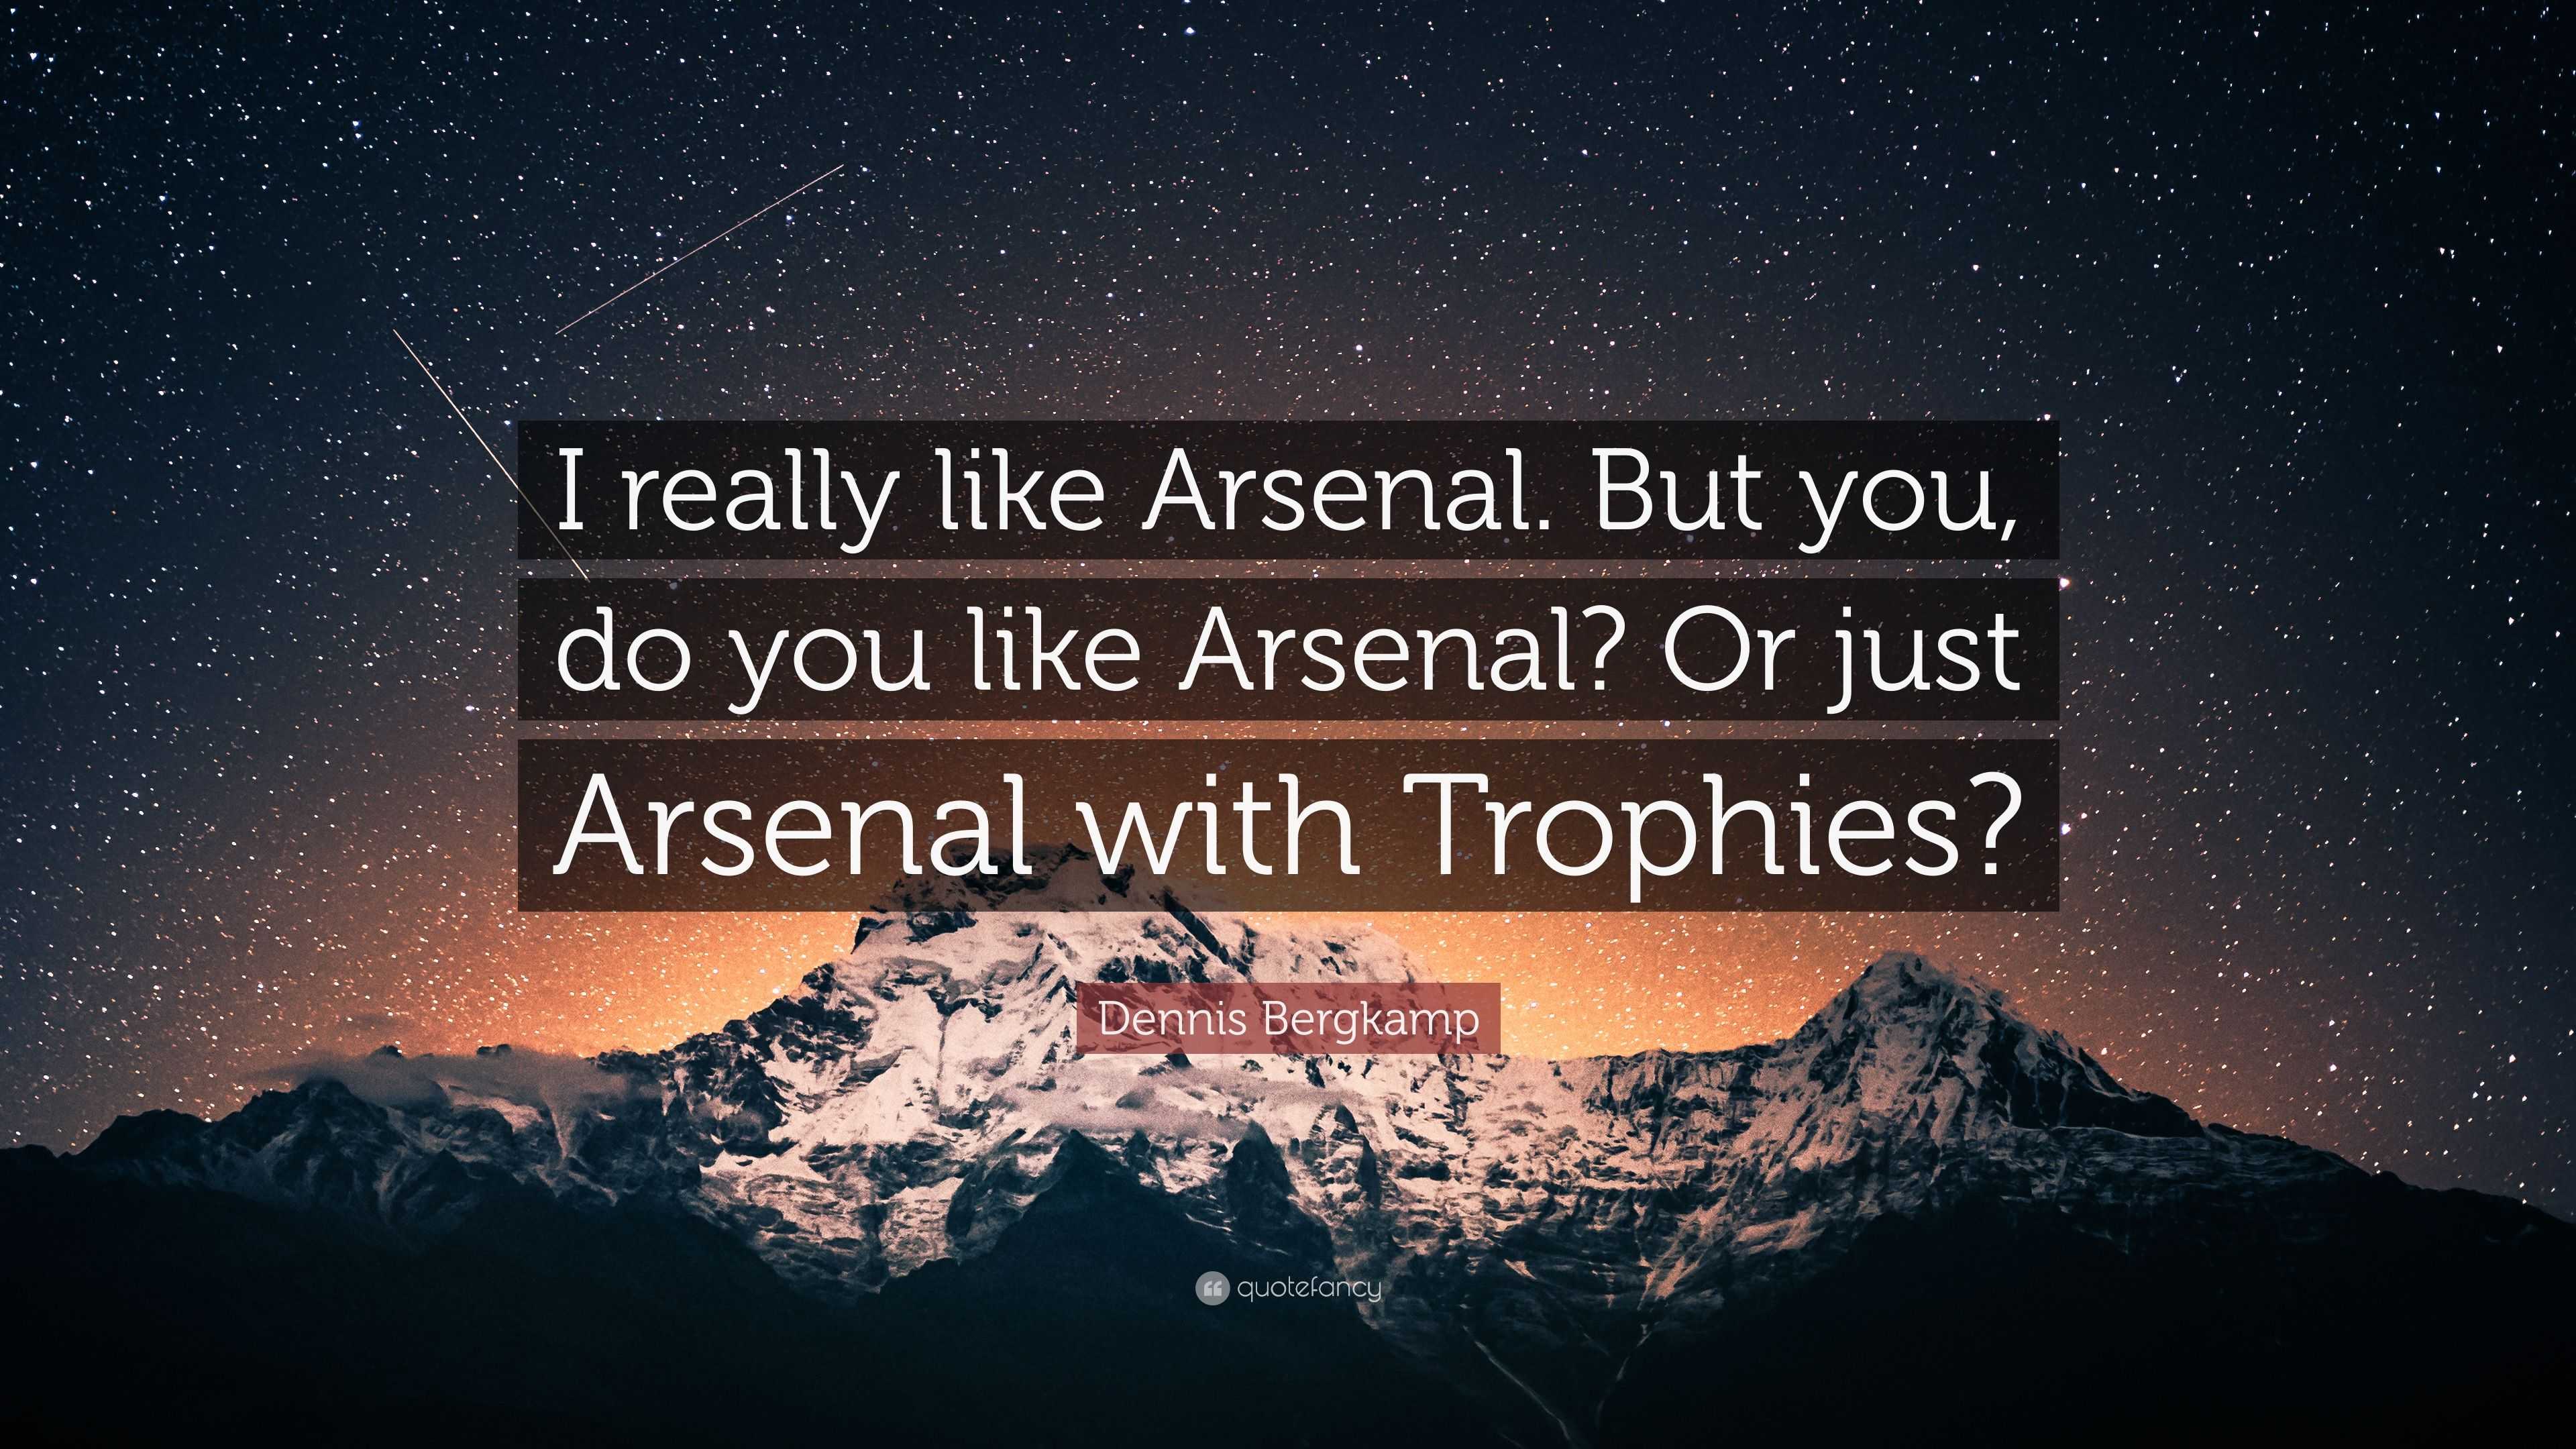 Dennis Bergkamp Quote: "I really like Arsenal. But you, do ...